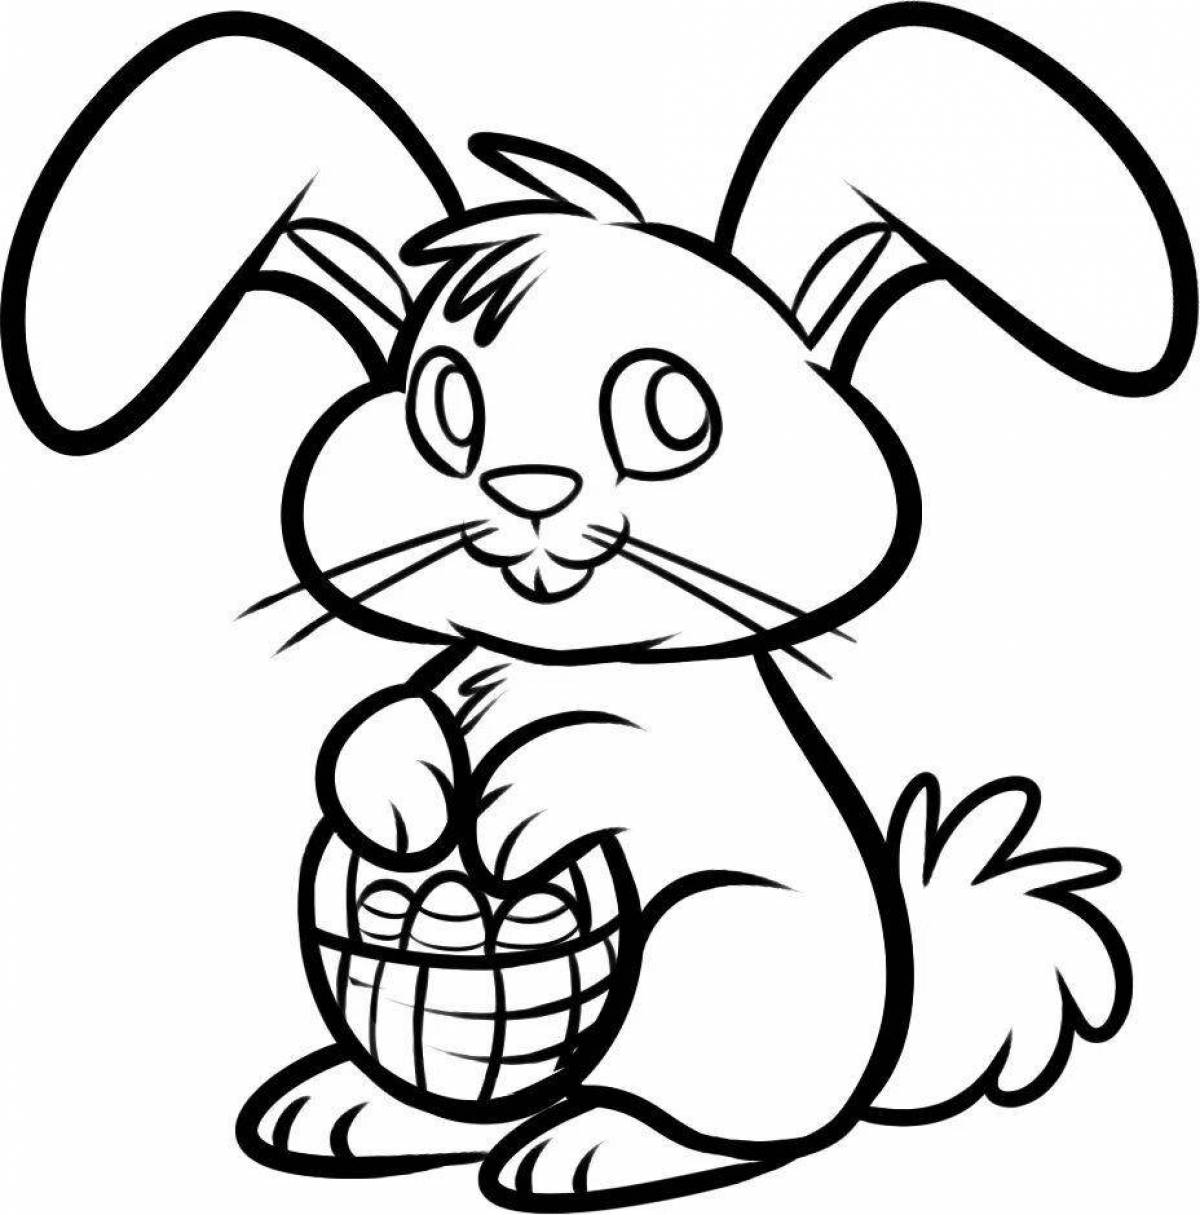 Coloring page adorable cat and hare